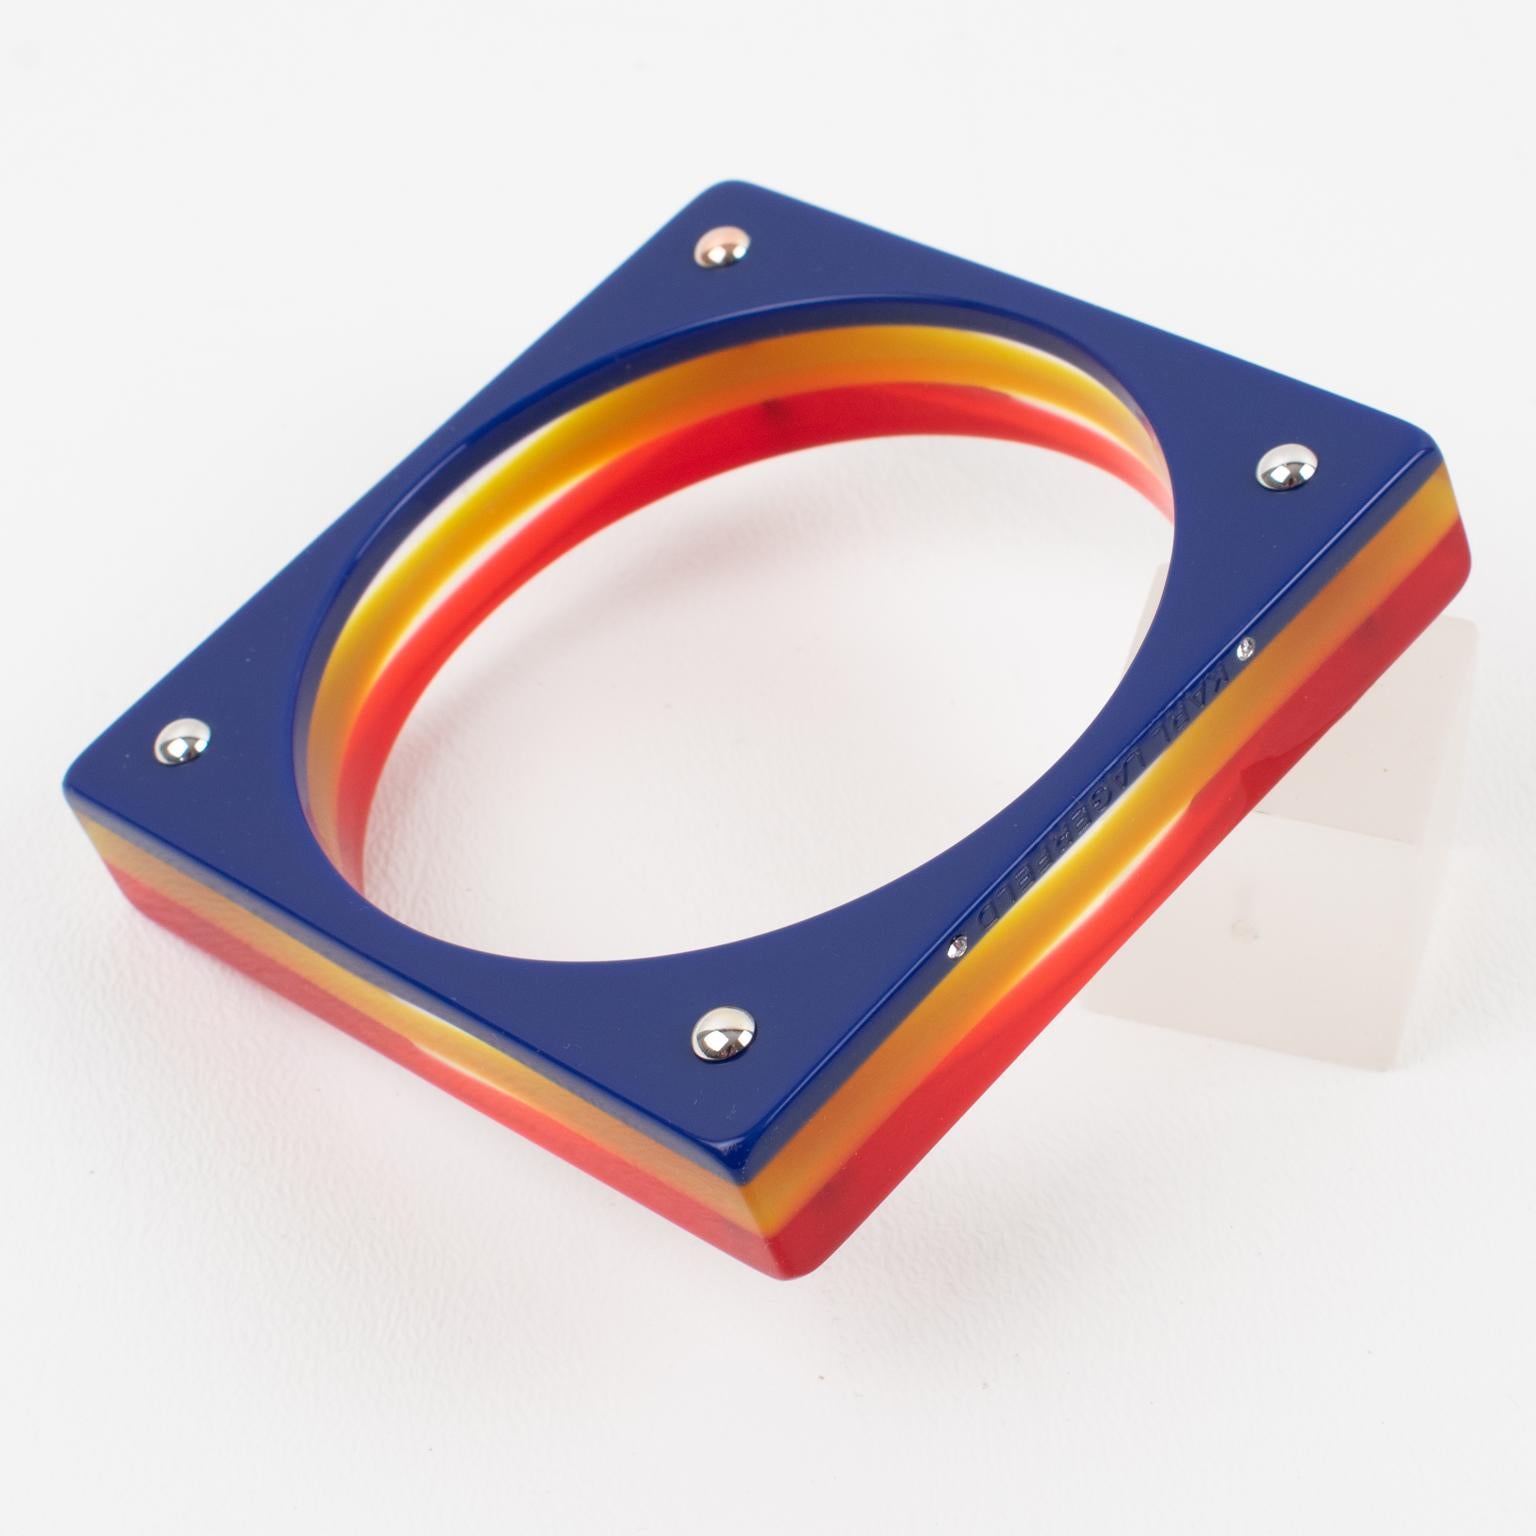 Karl Lagerfeld Paris designed this elegant laminated resin bracelet bangle. The bangle is square-shaped with a multi-layers lamination process in red, yellow, and blue colors with transparency. The engraved 